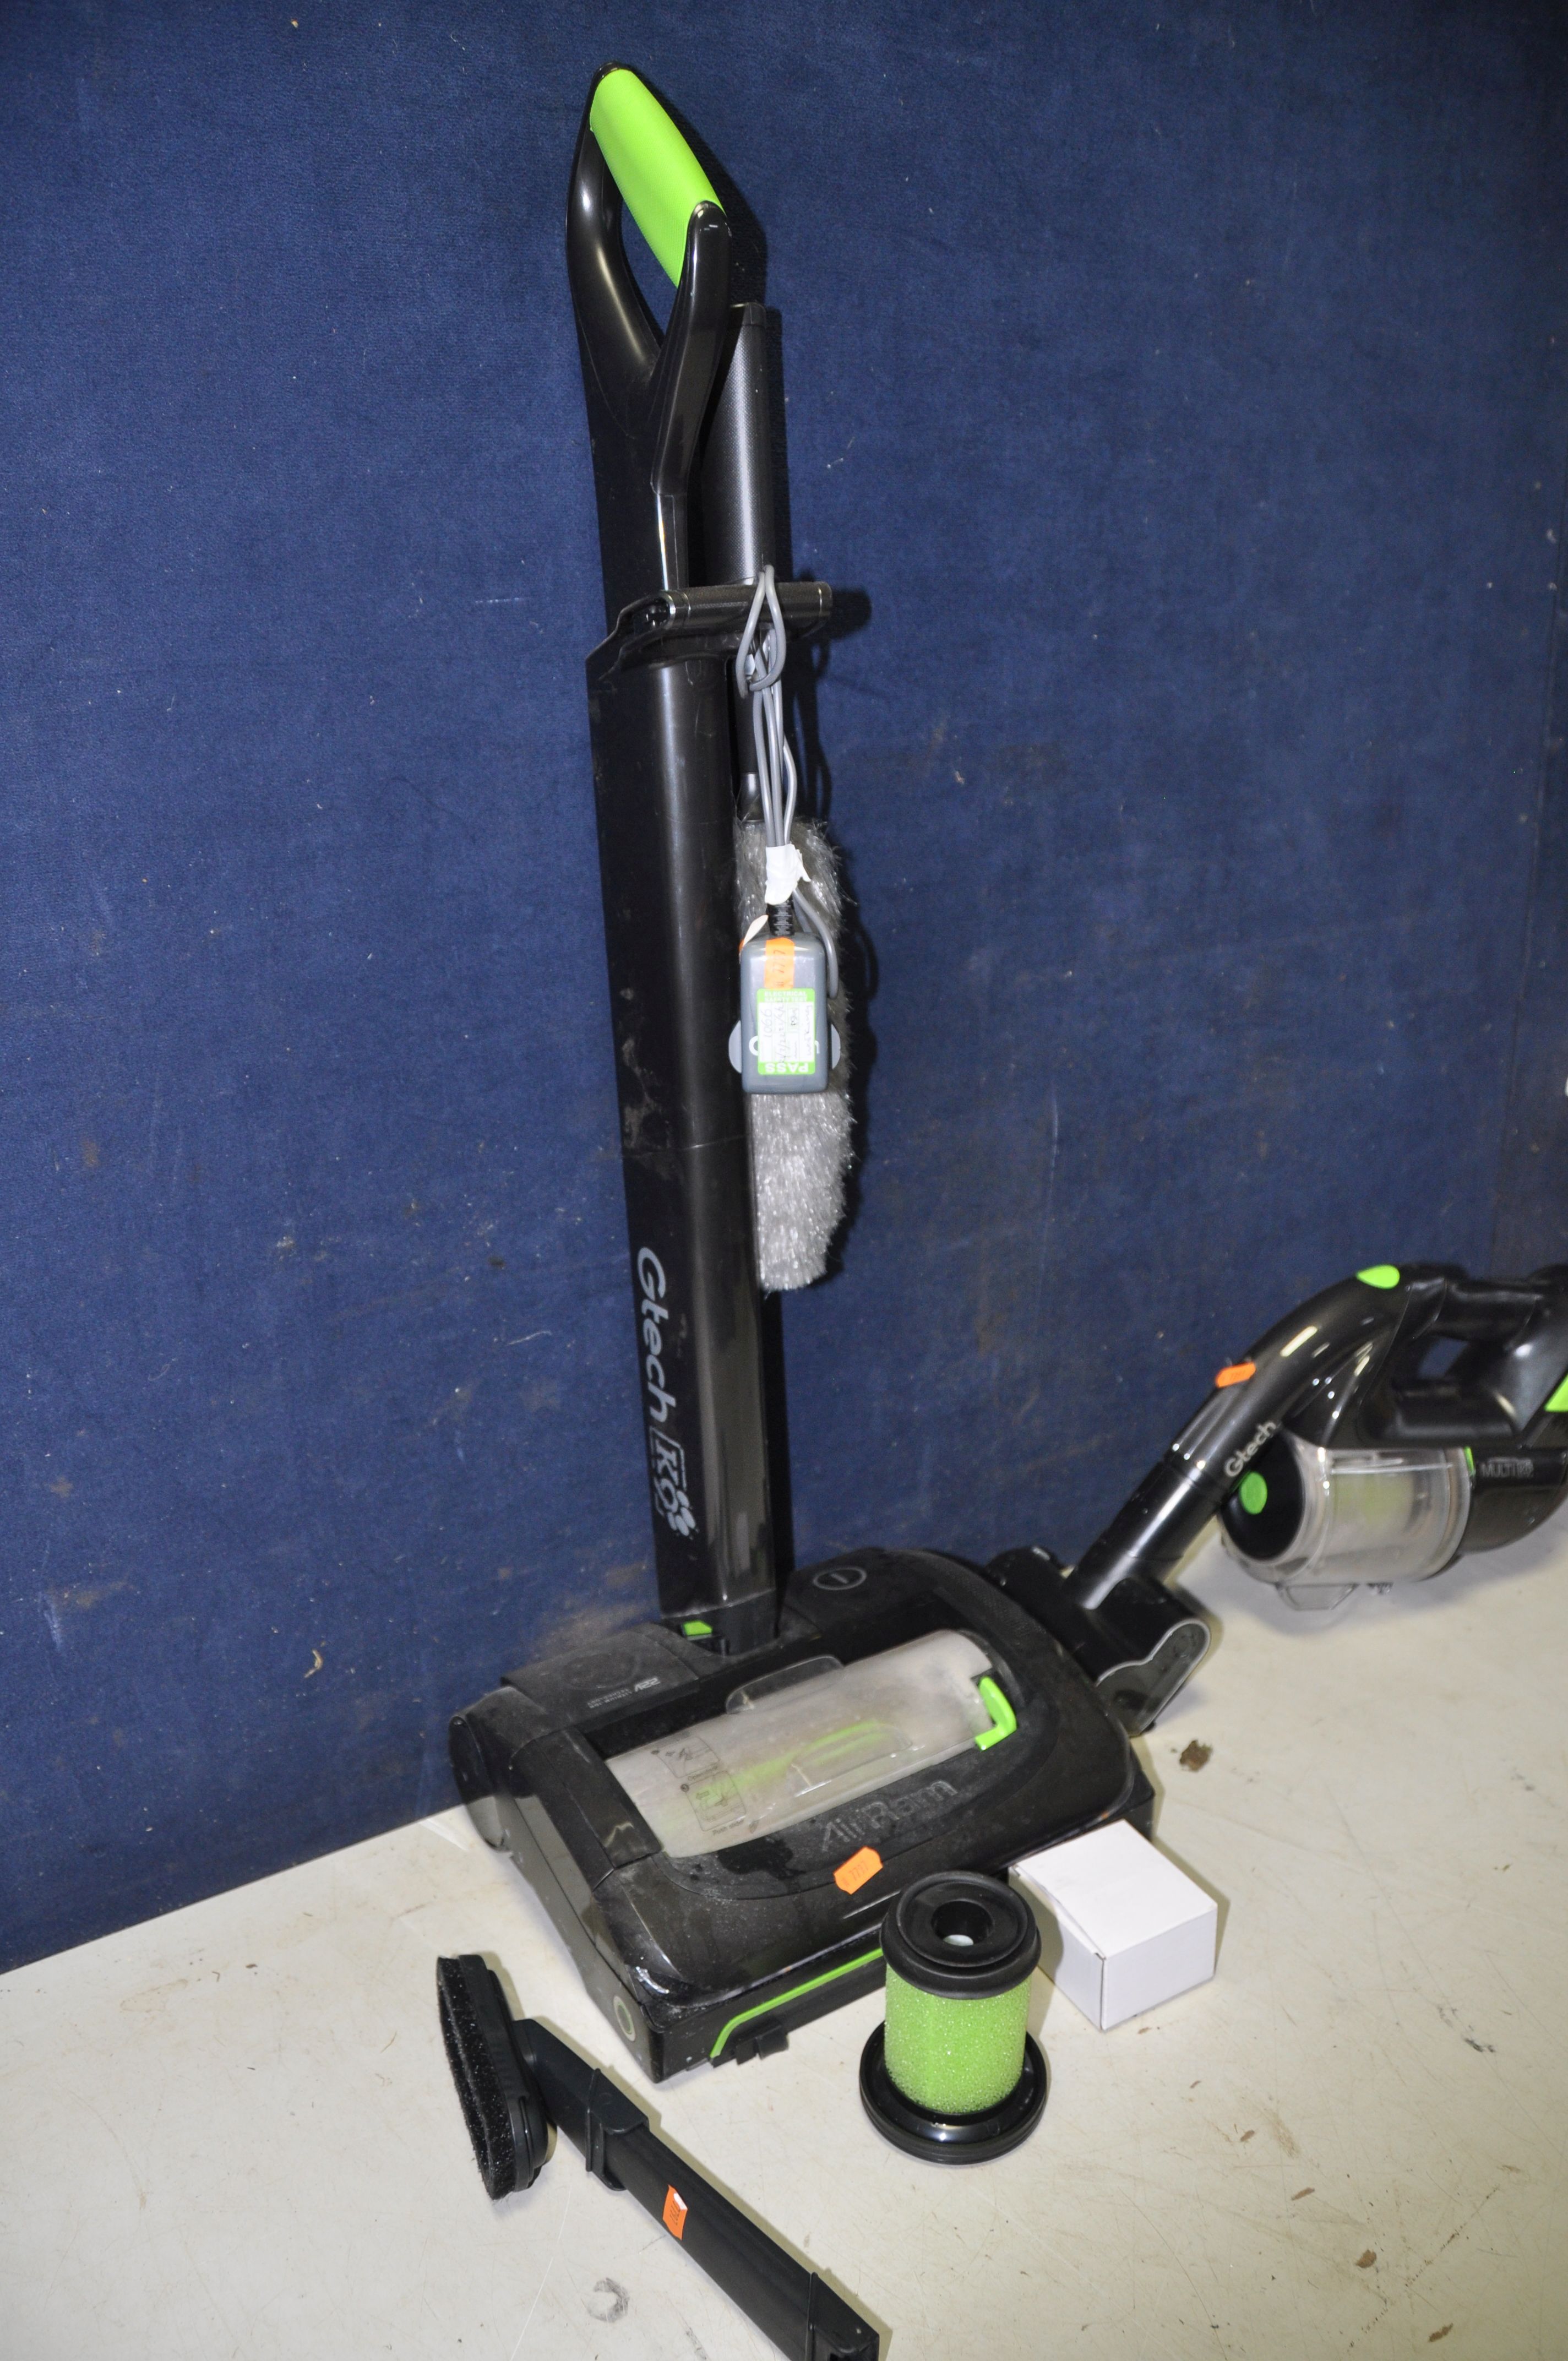 A G-TECH AIR RAM K9 VACUUM with charger, along with a G-tech multi K9 with spare filter and air - Image 3 of 3